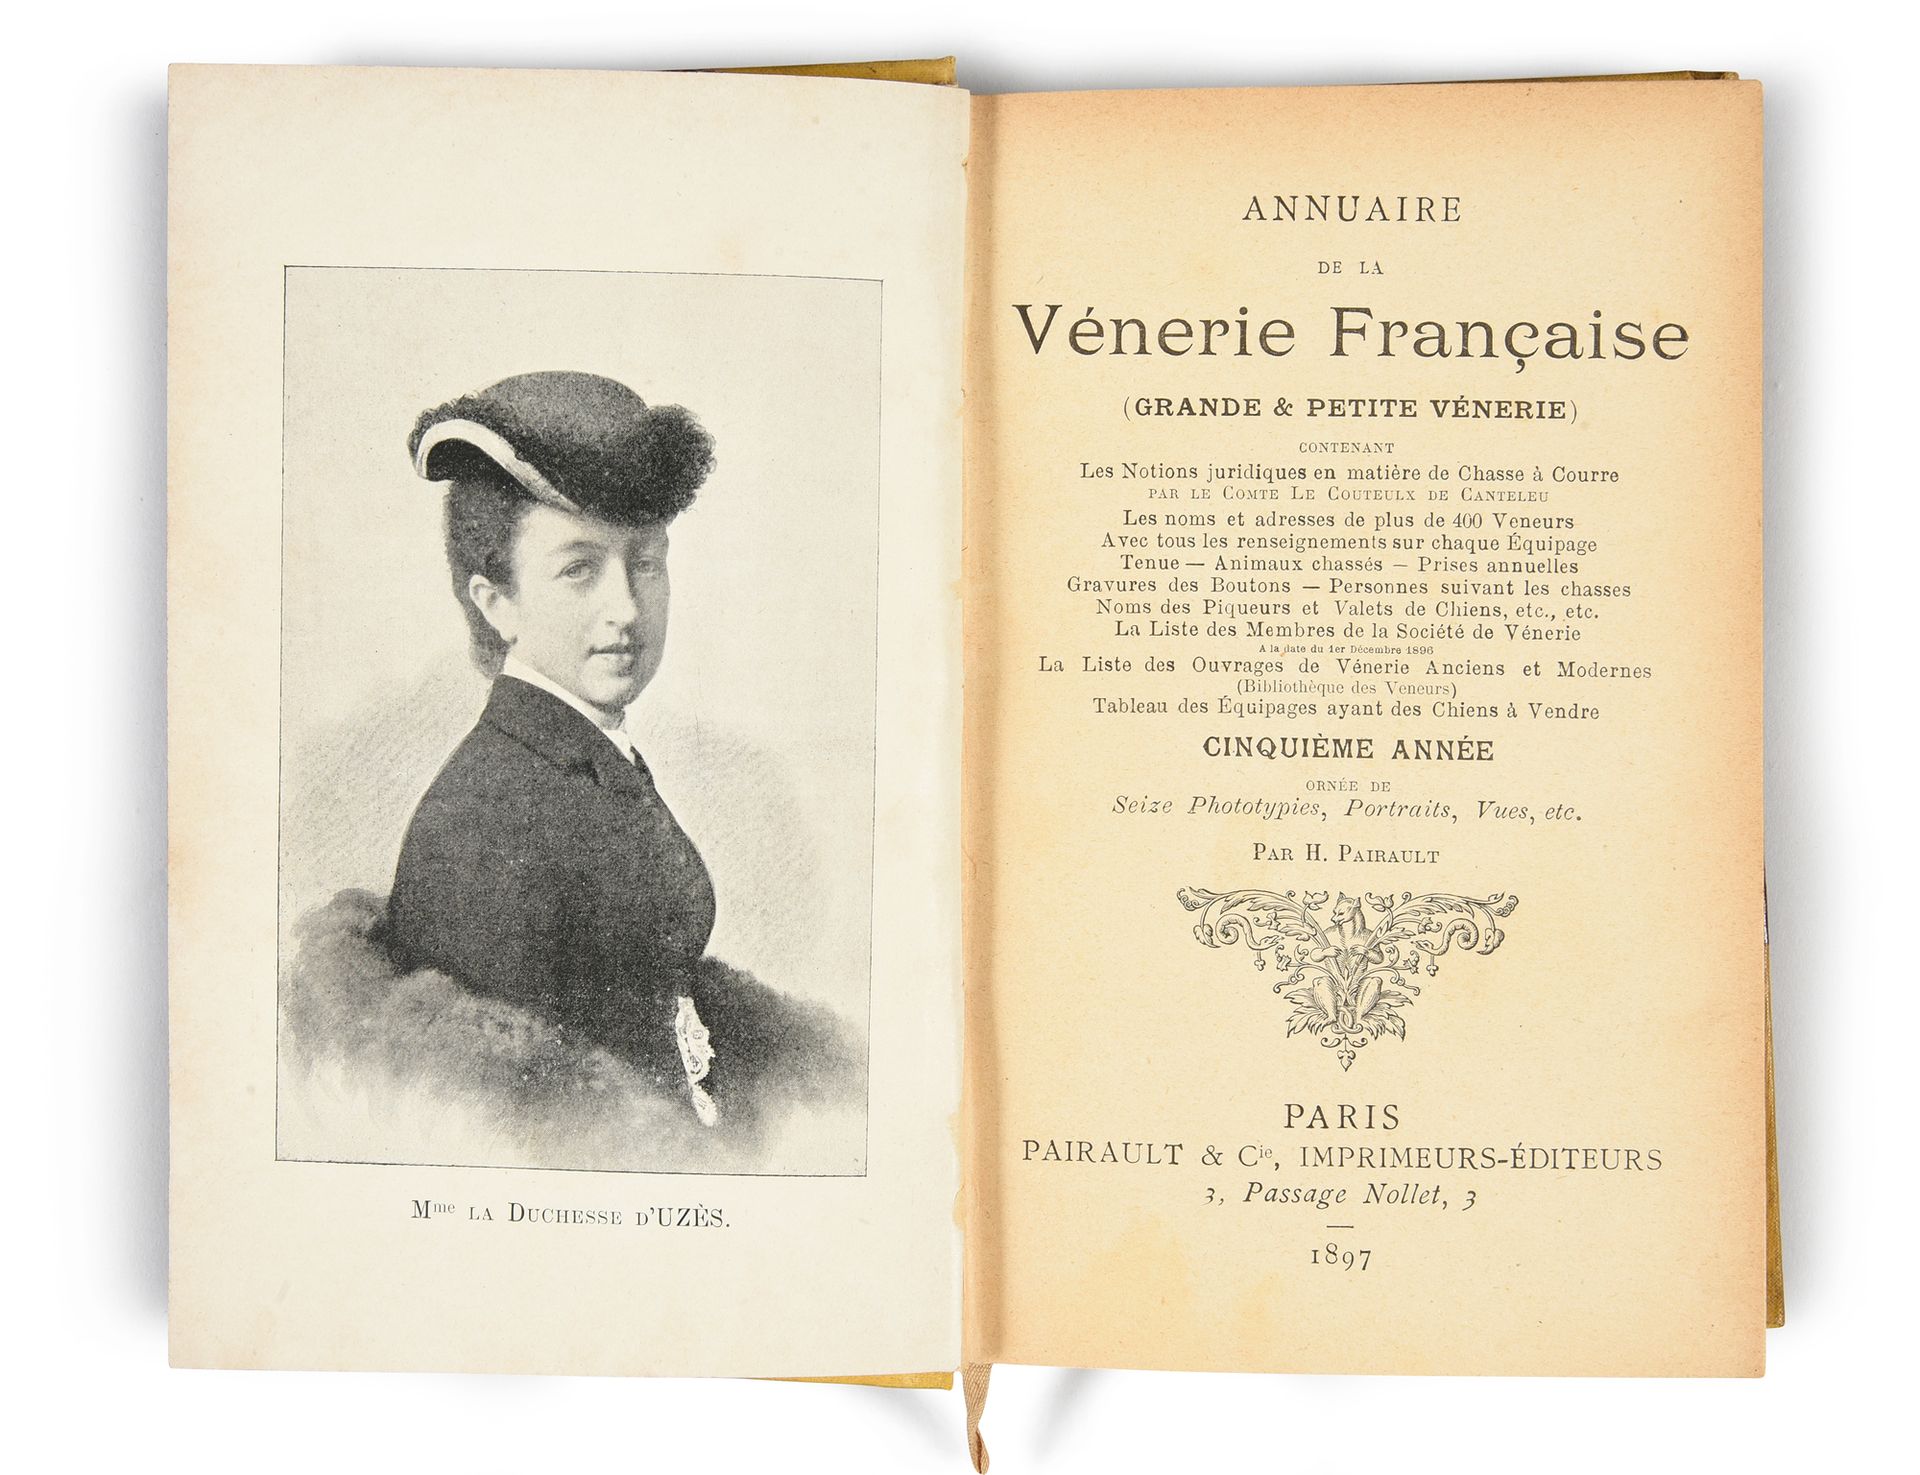 Null Yearbook of the French venery: Year 1897.